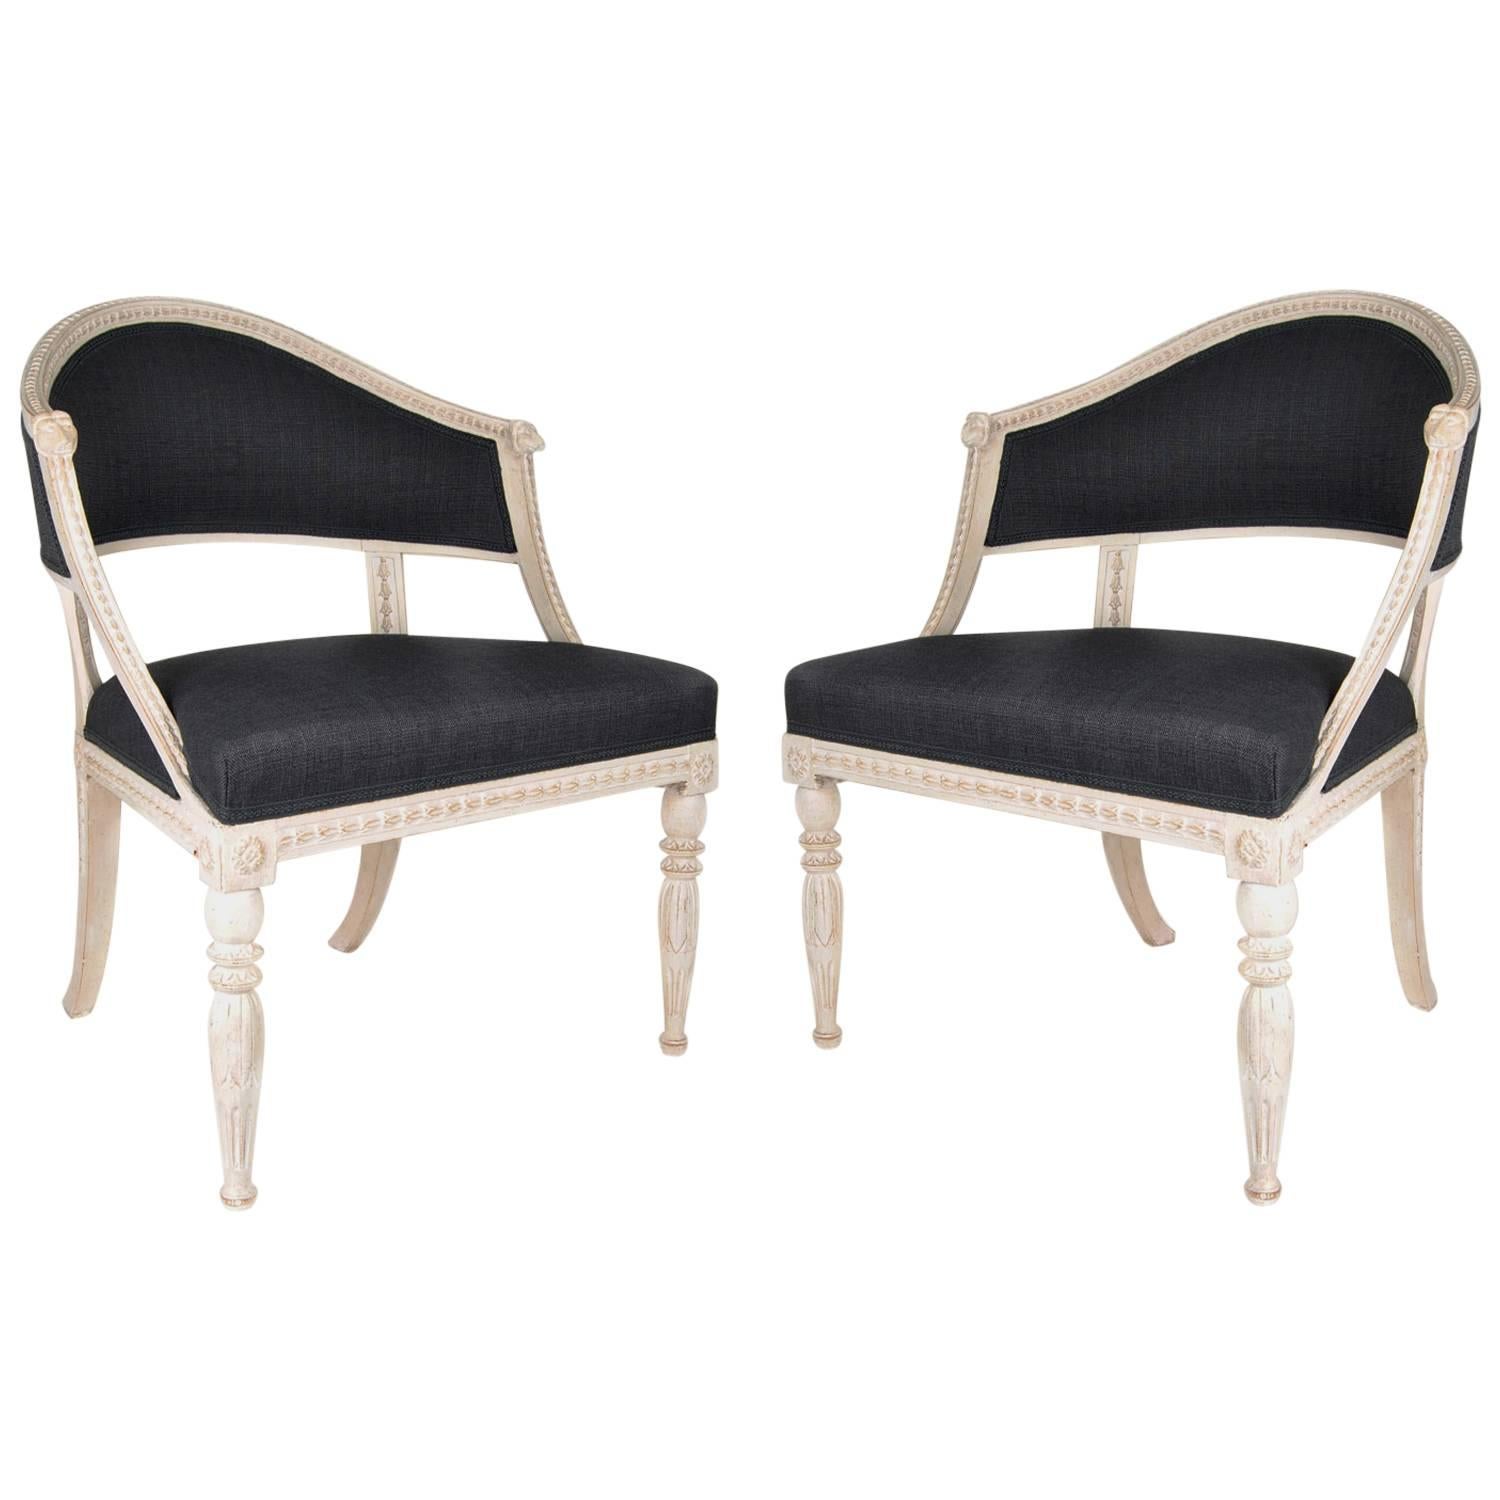 Signed Gustavian Chairs by Ephraim Ståhl